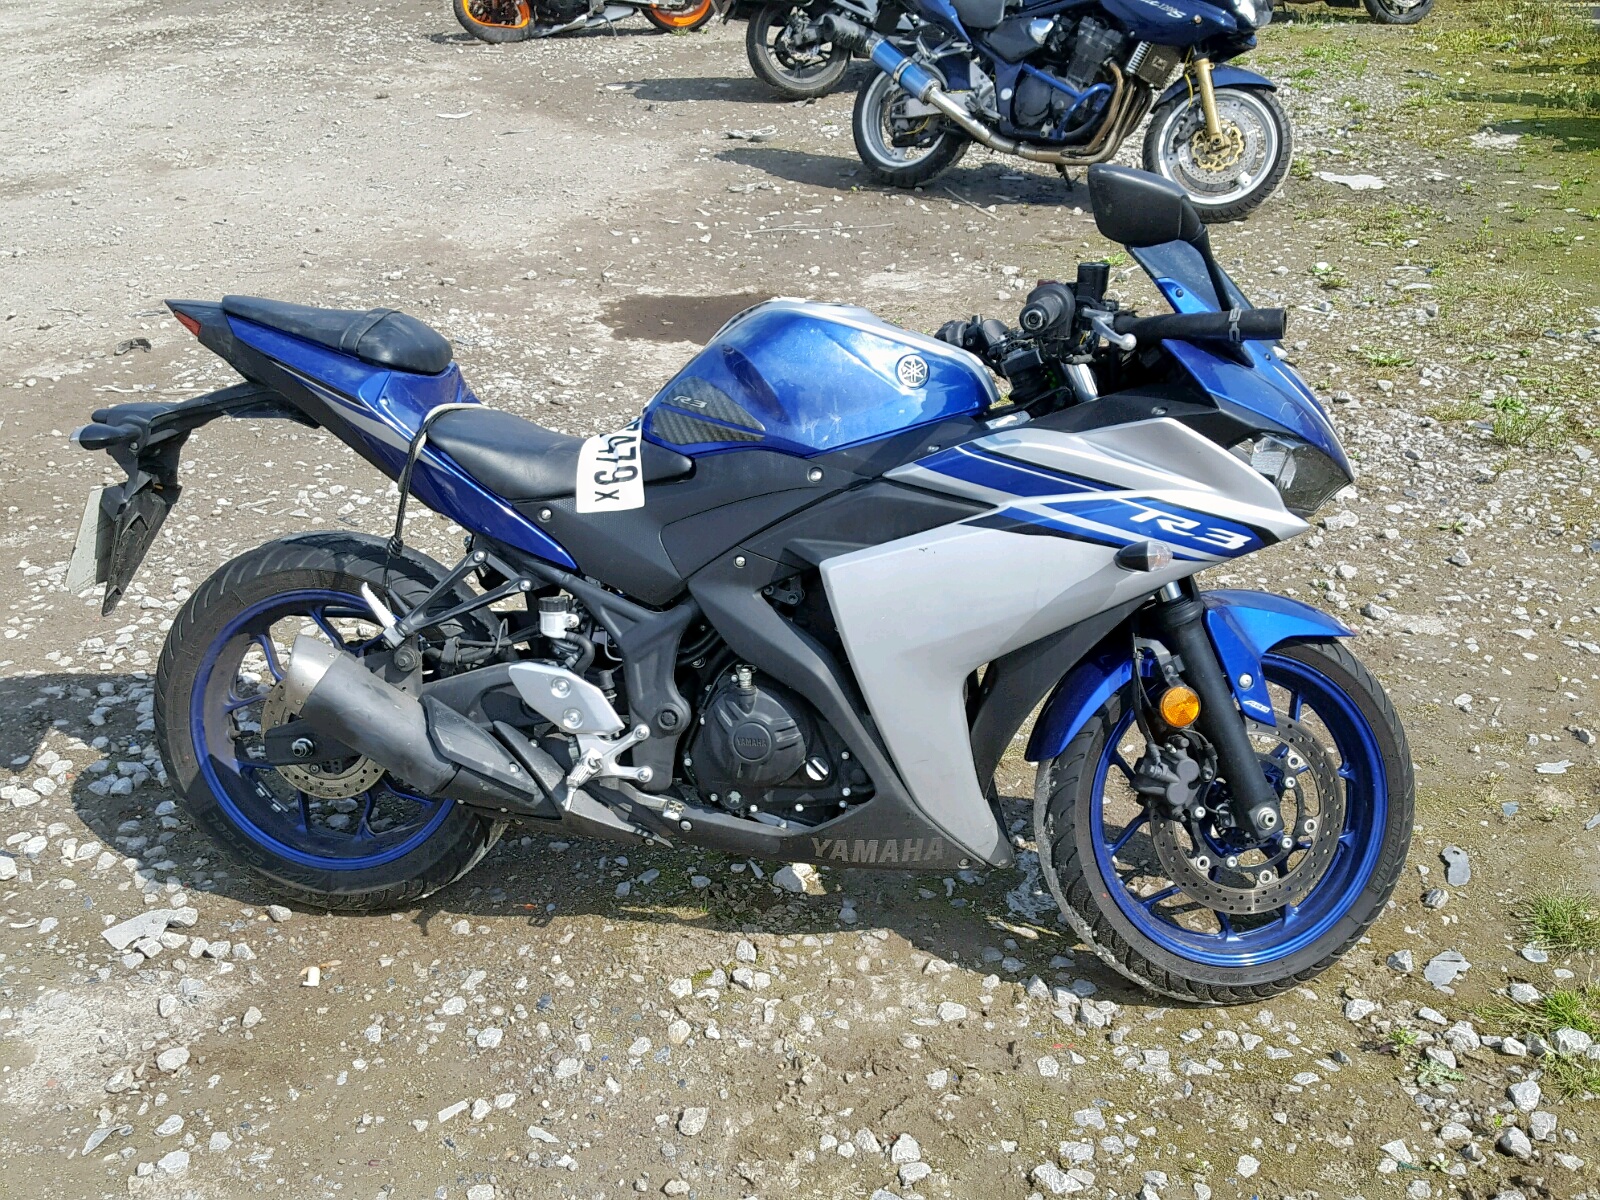 2017 YAMAHA YZF R3 ABS for sale at Copart UK - Salvage Car Auctions